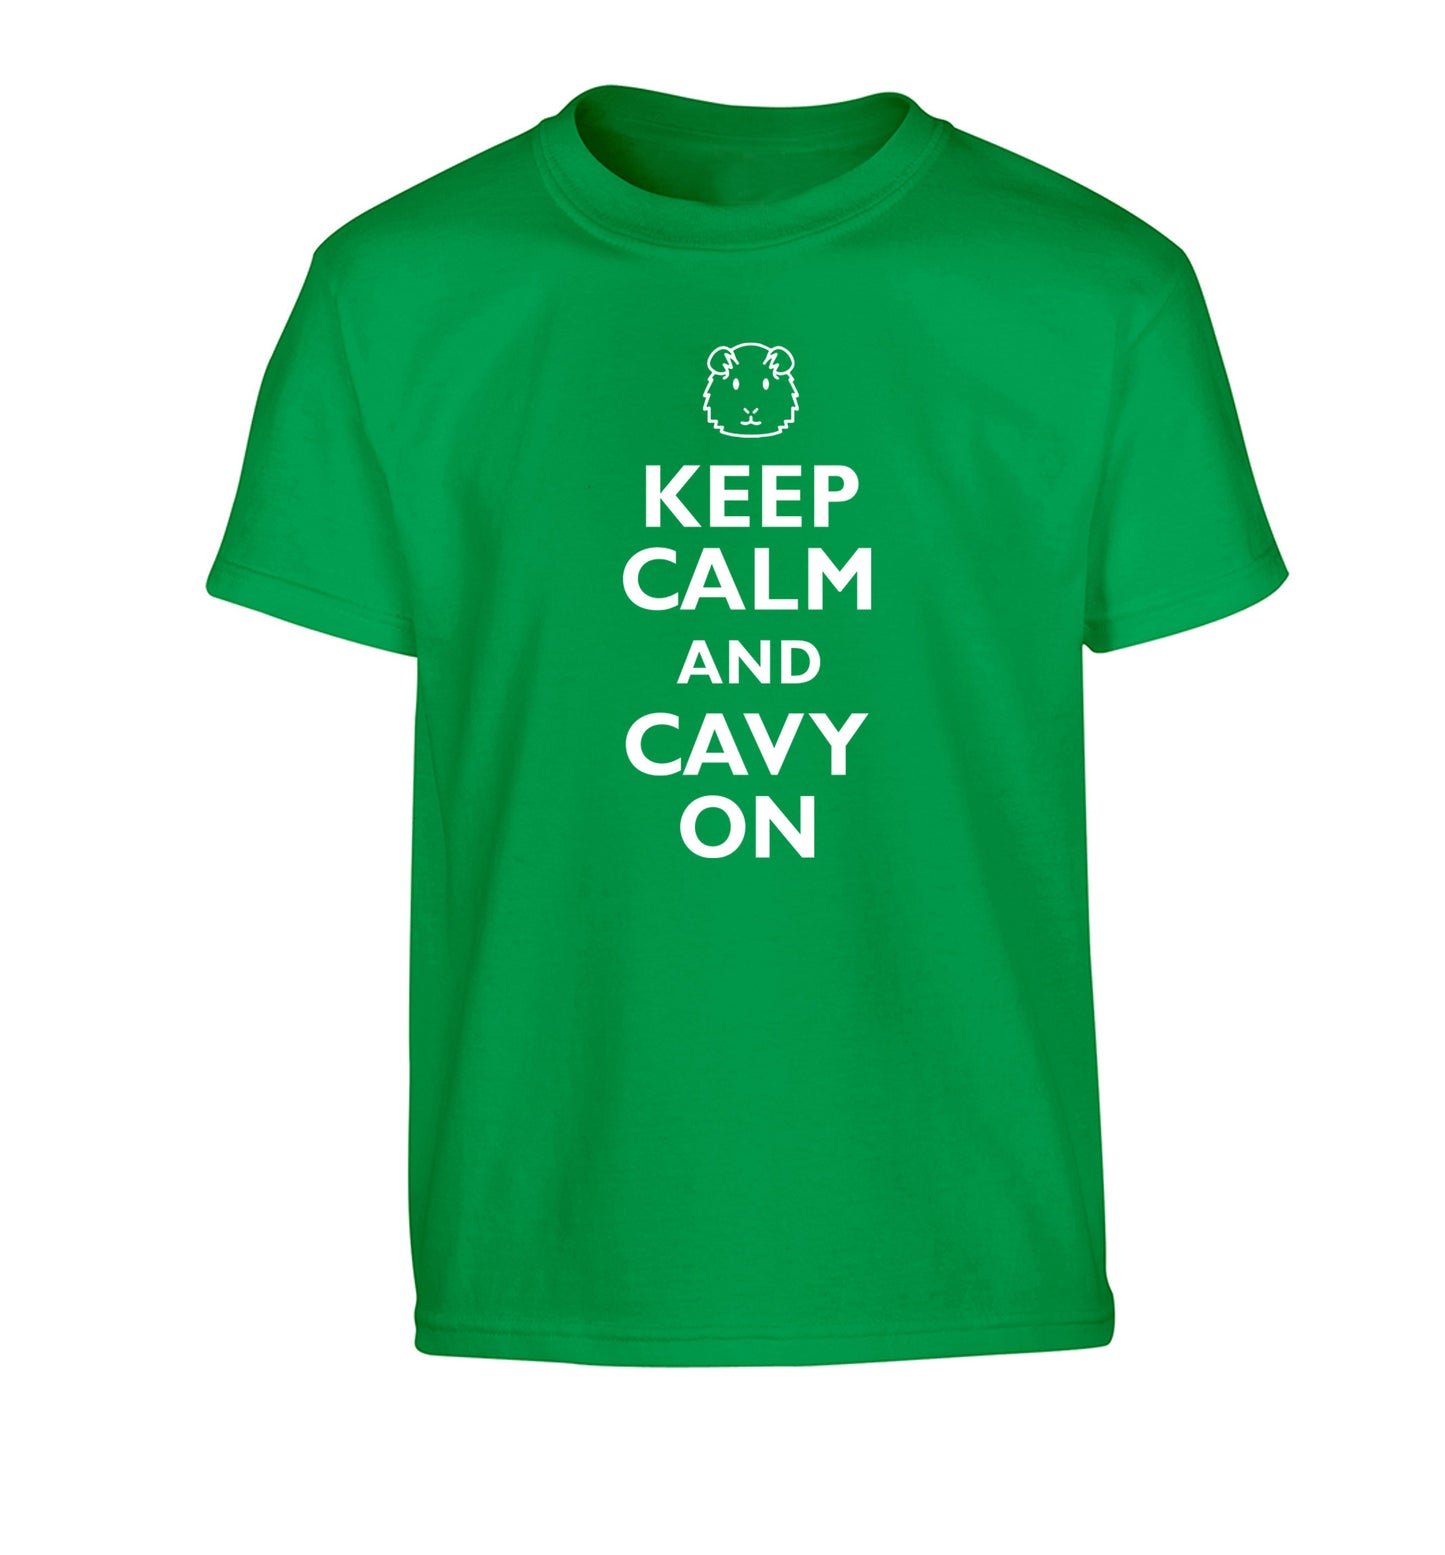 Keep calm and cavvy on Children's green Tshirt 12-14 Years